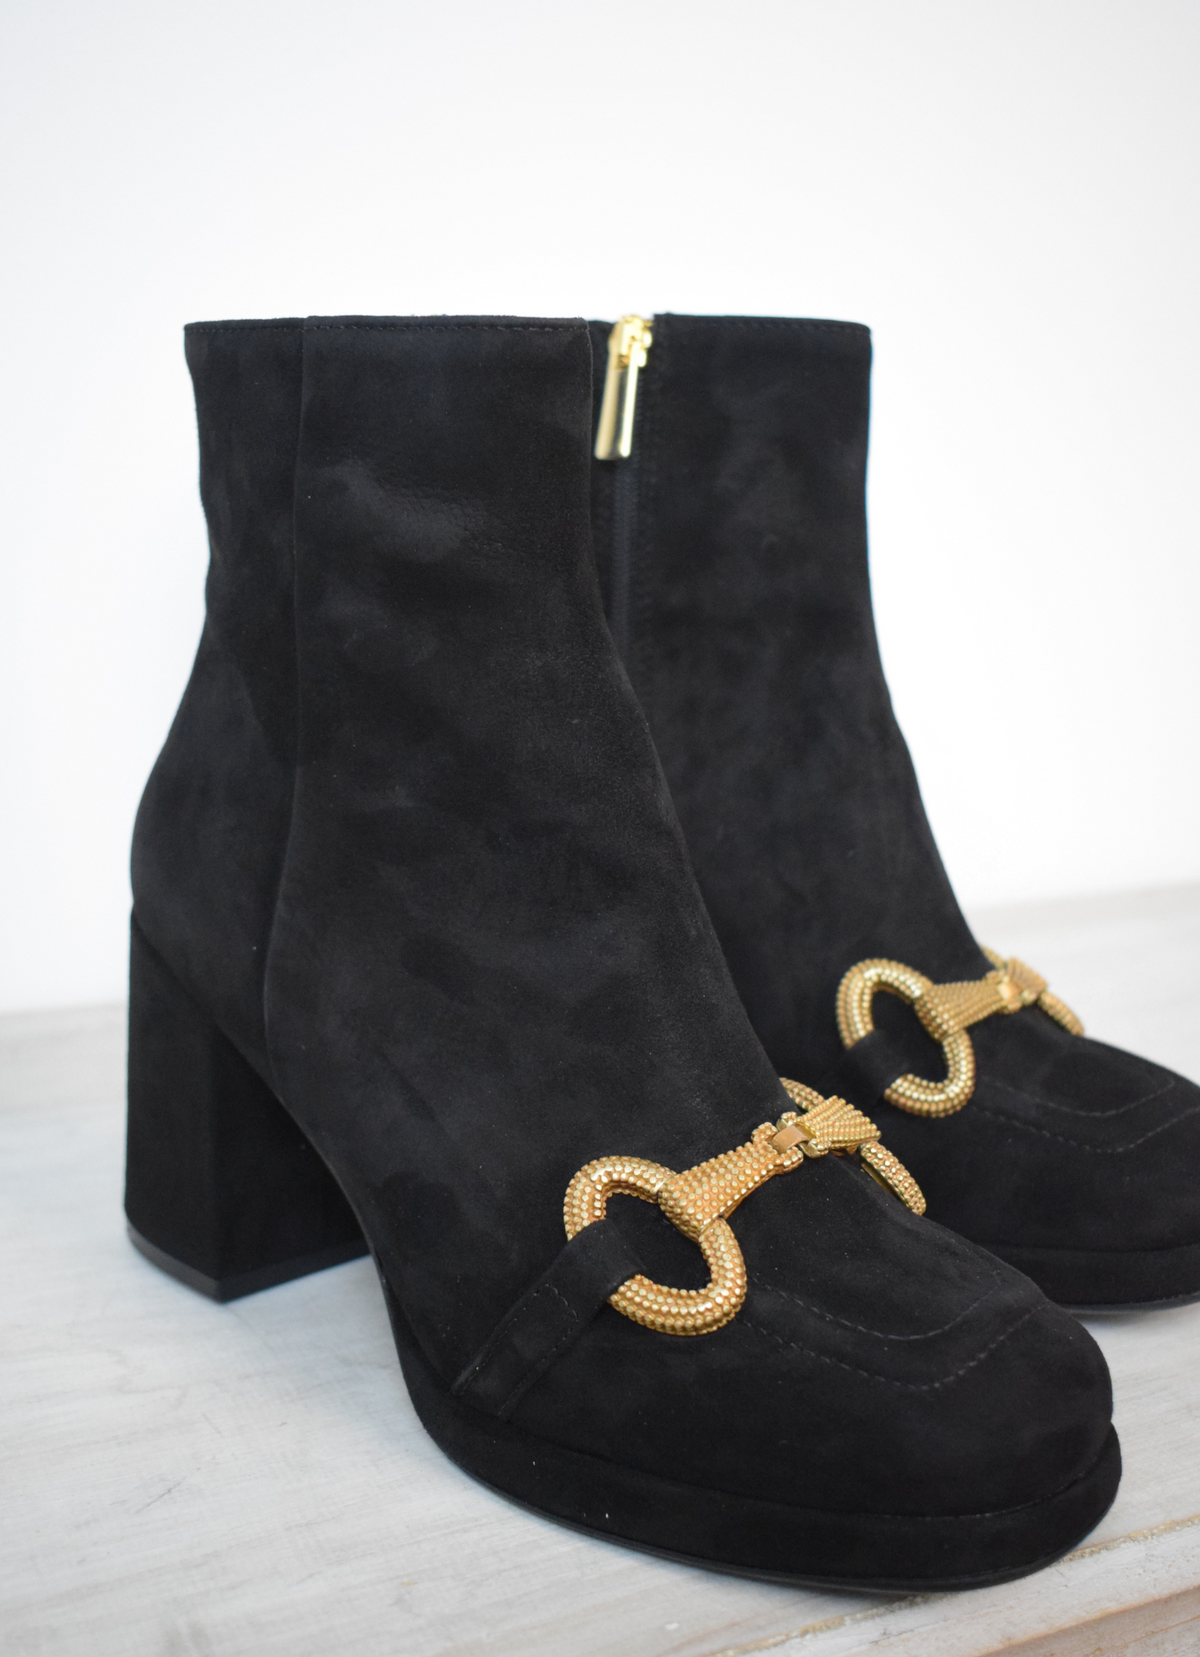 Black suede boot with gold buckle 